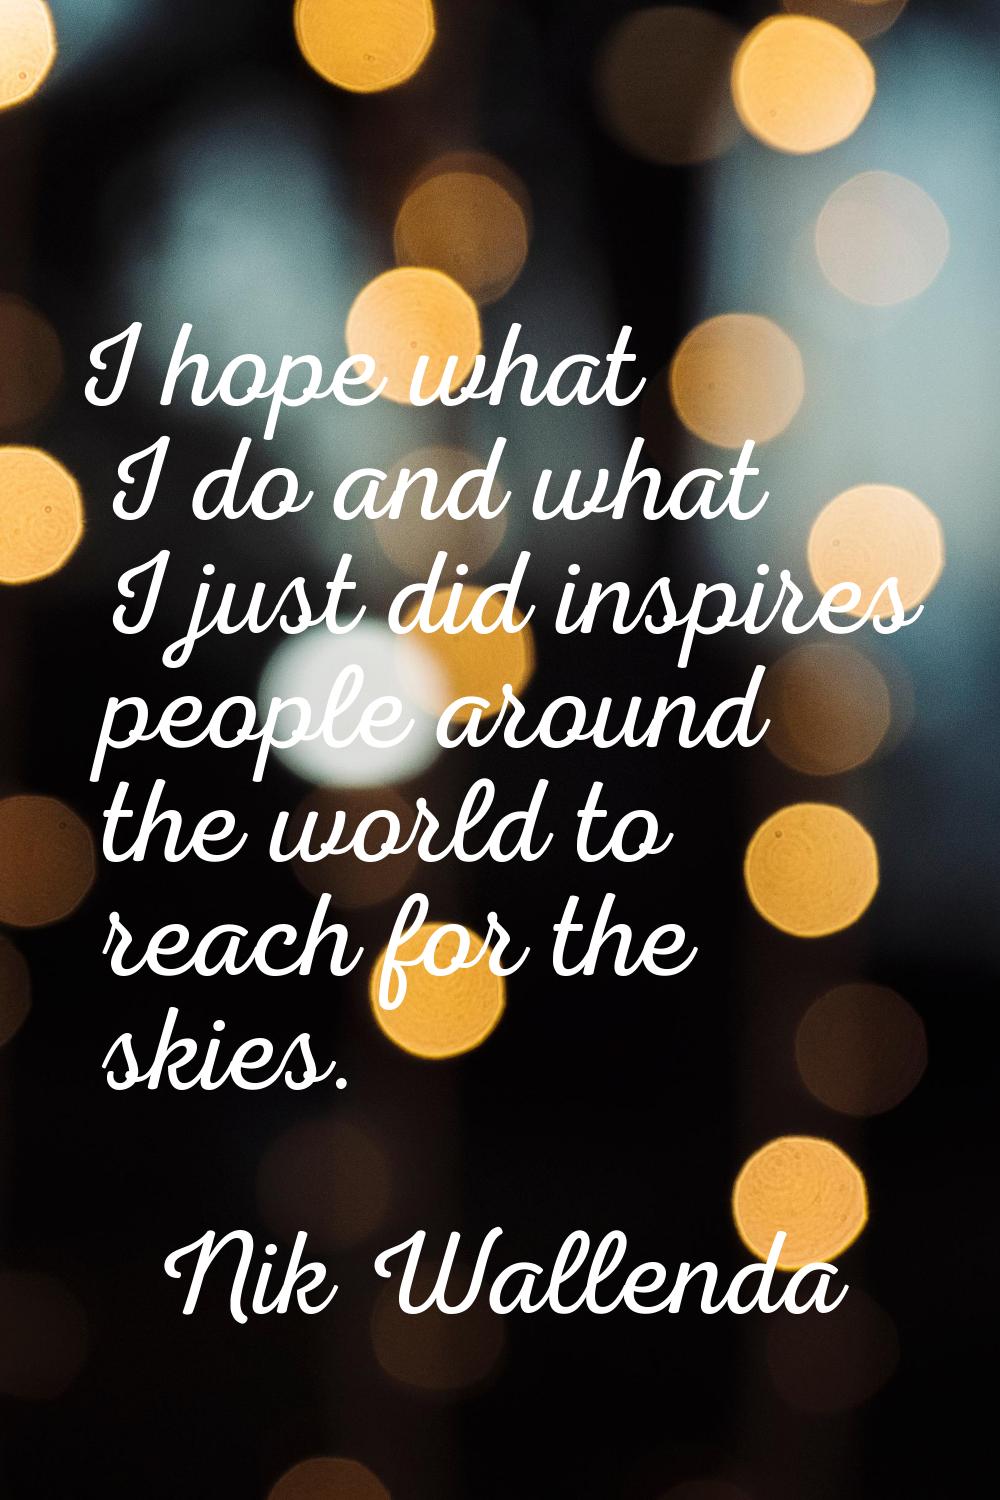 I hope what I do and what I just did inspires people around the world to reach for the skies.